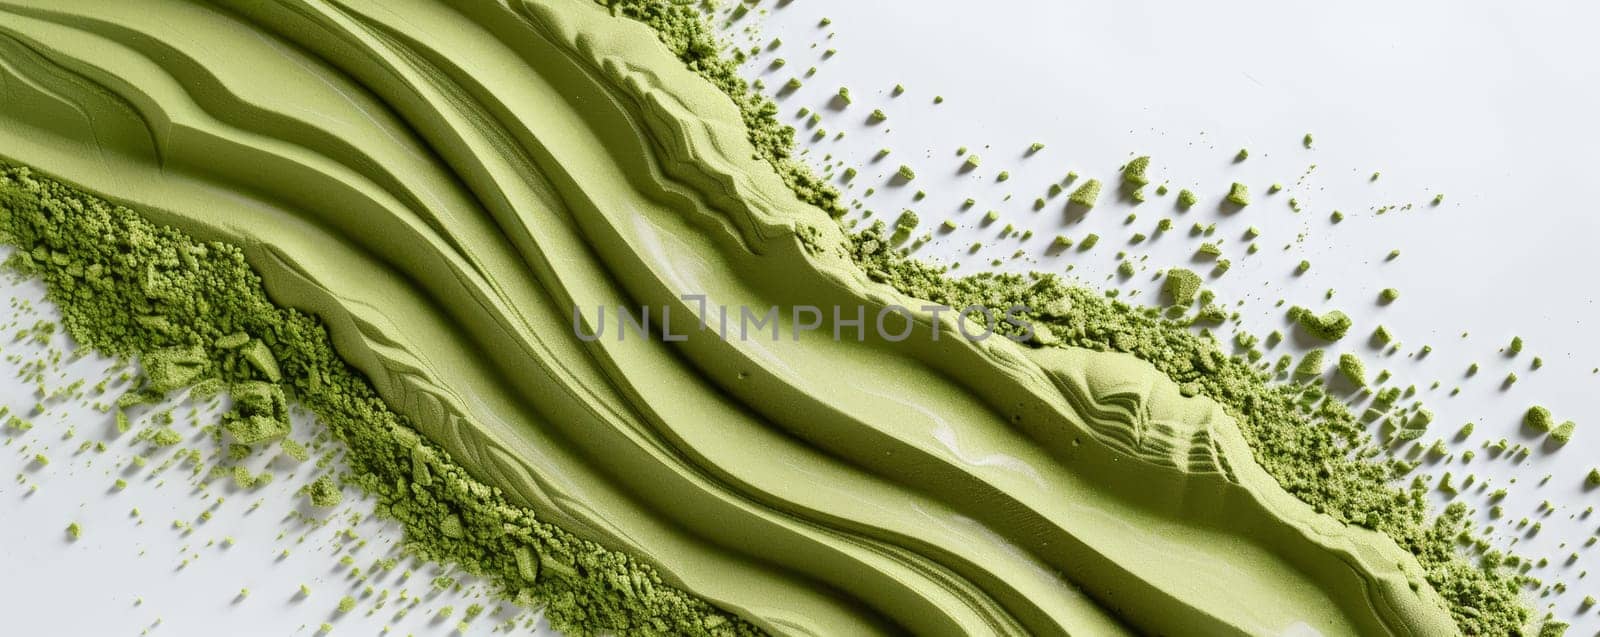 A detailed view of a bright green substance spread out on a clean white surface. The substance appears thick and slightly textured, with vibrant hues contrasting against the neutral background.